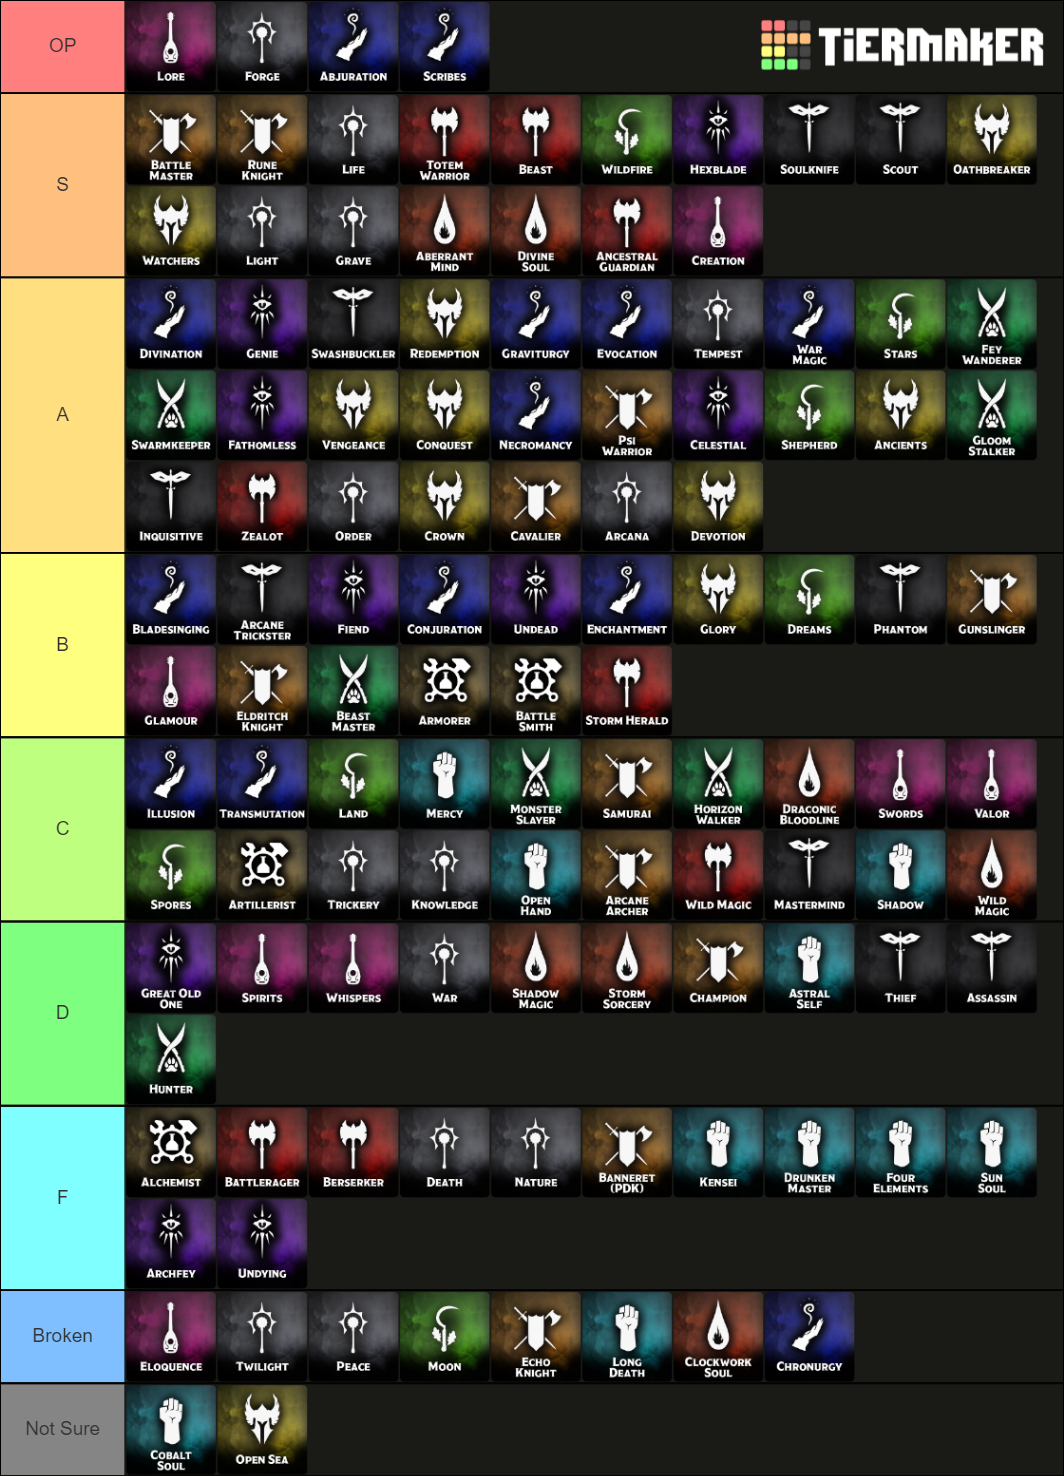 Dungeons Dragons E Subclasses July Update Tier List Community Rankings TierMaker